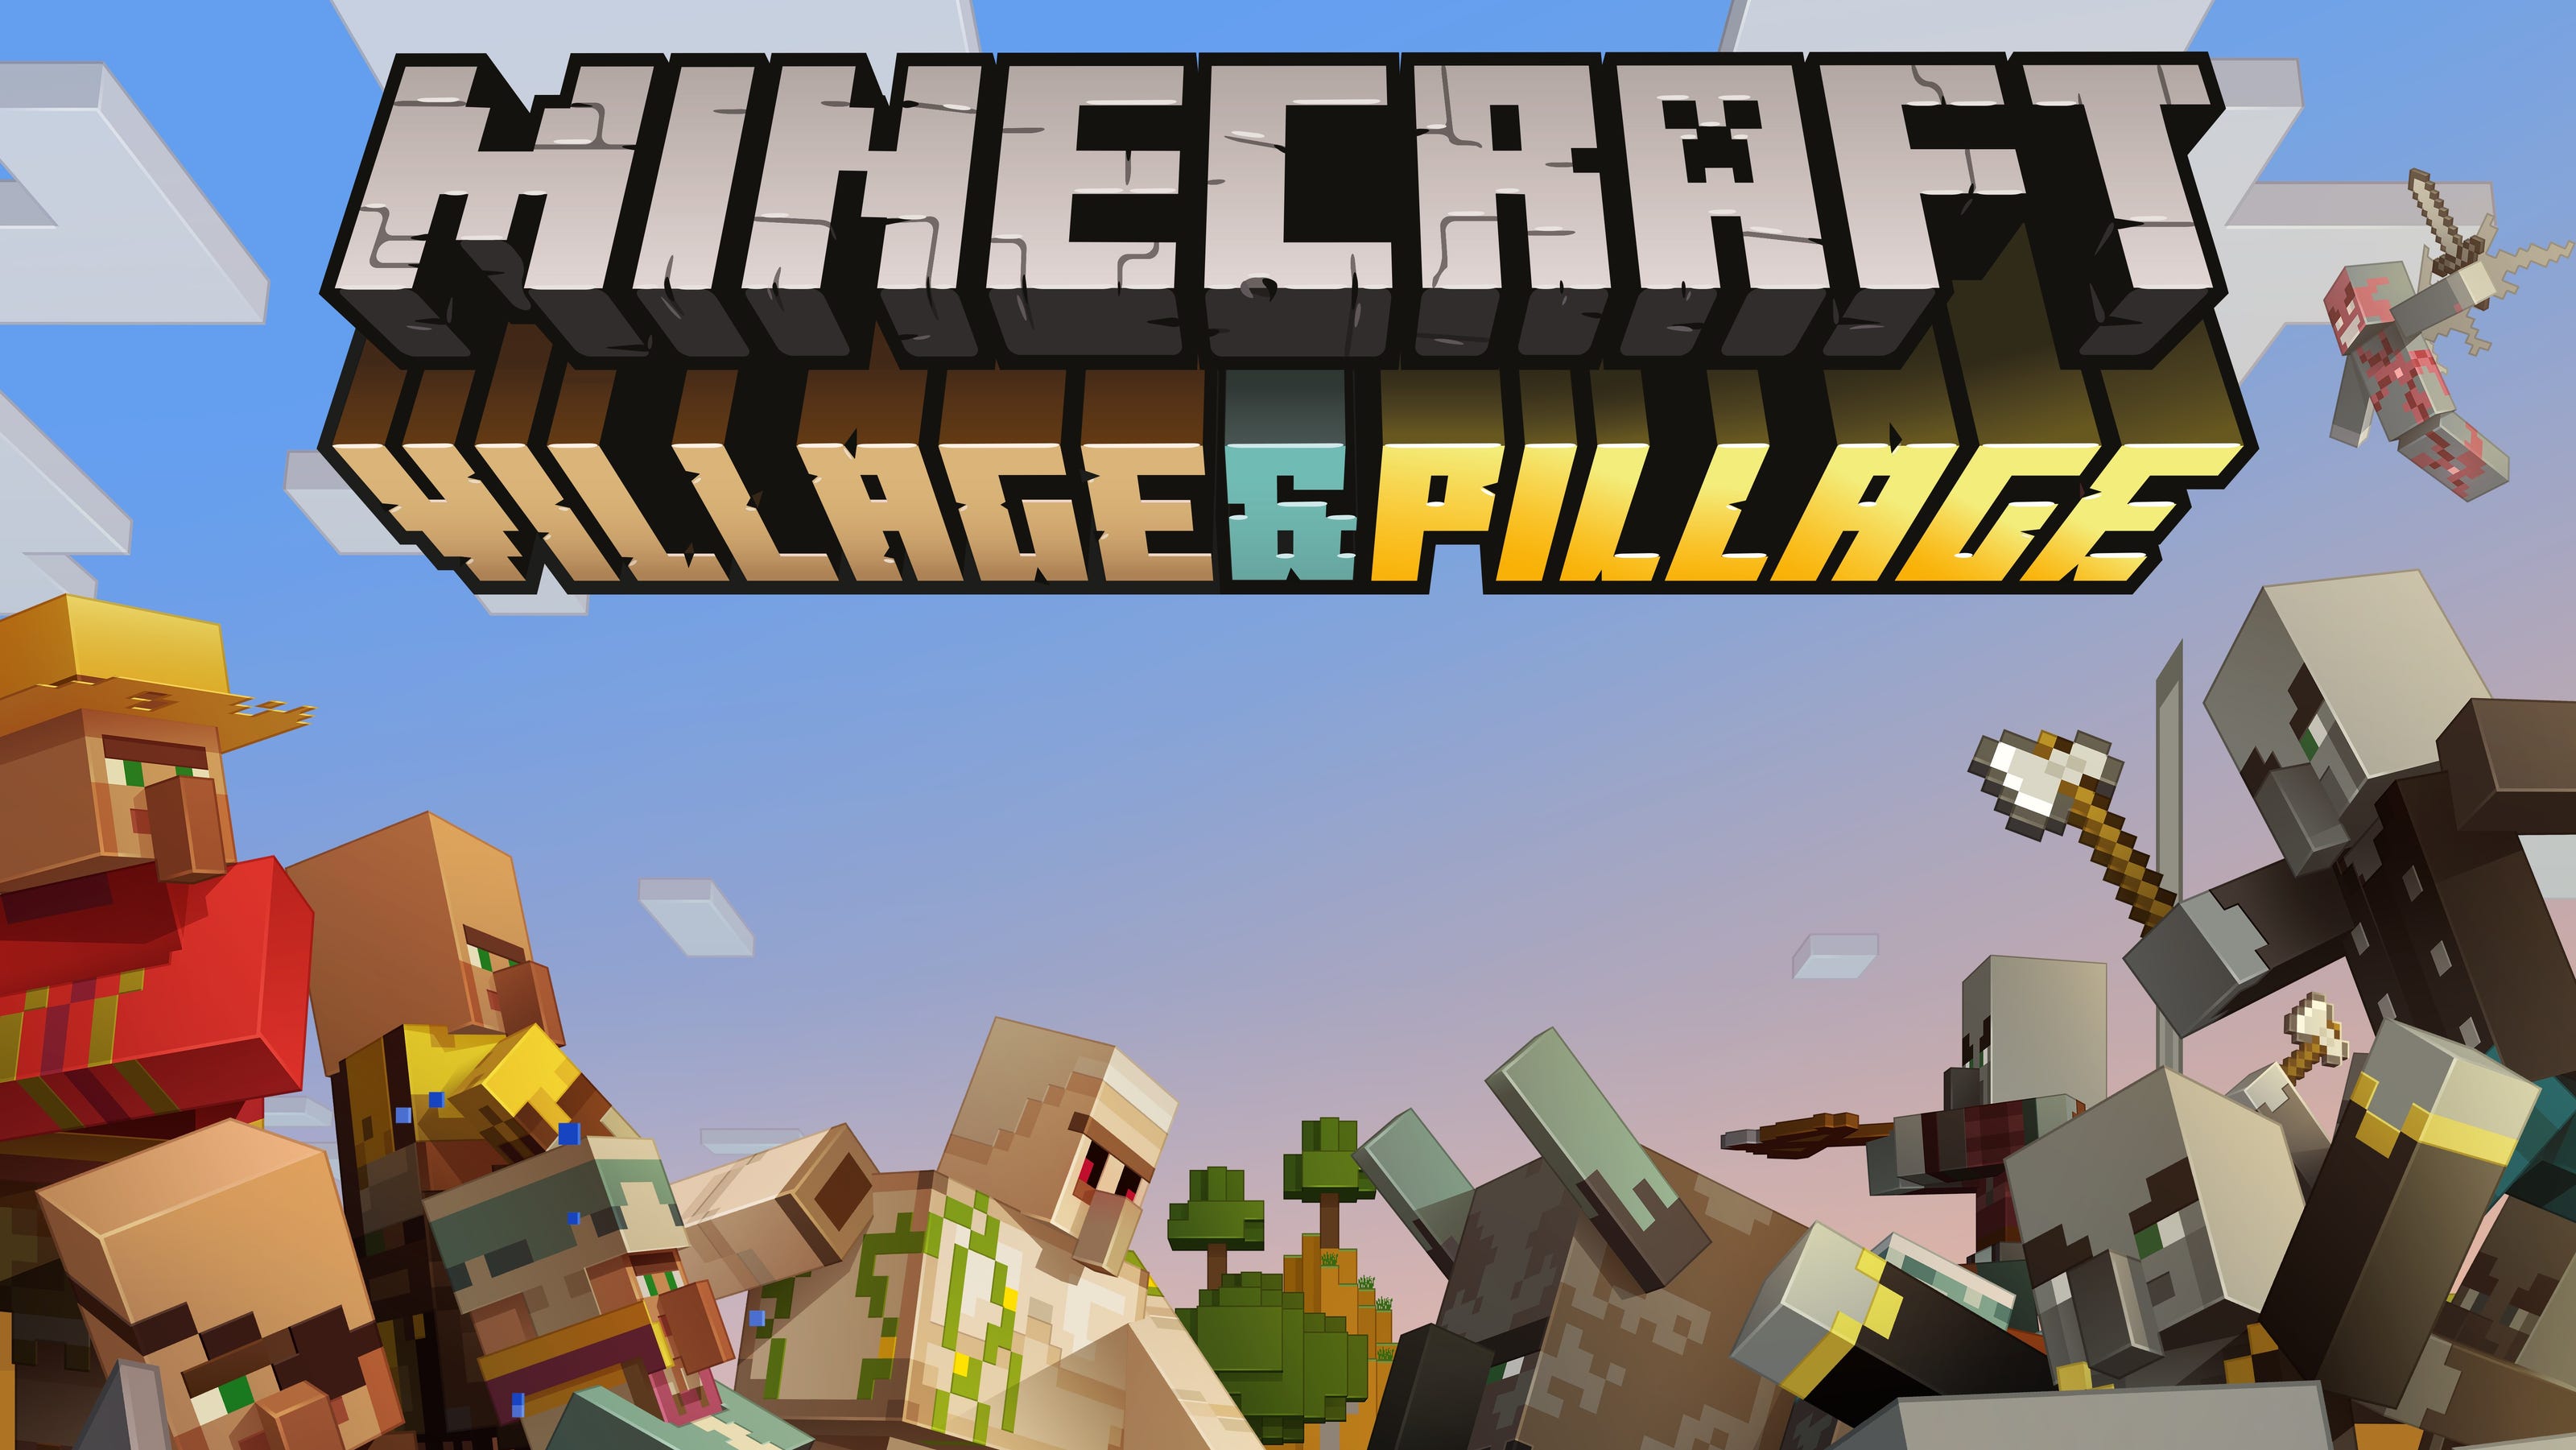 New Minecraft Update Means Better Villages Pillagers With Crossbows